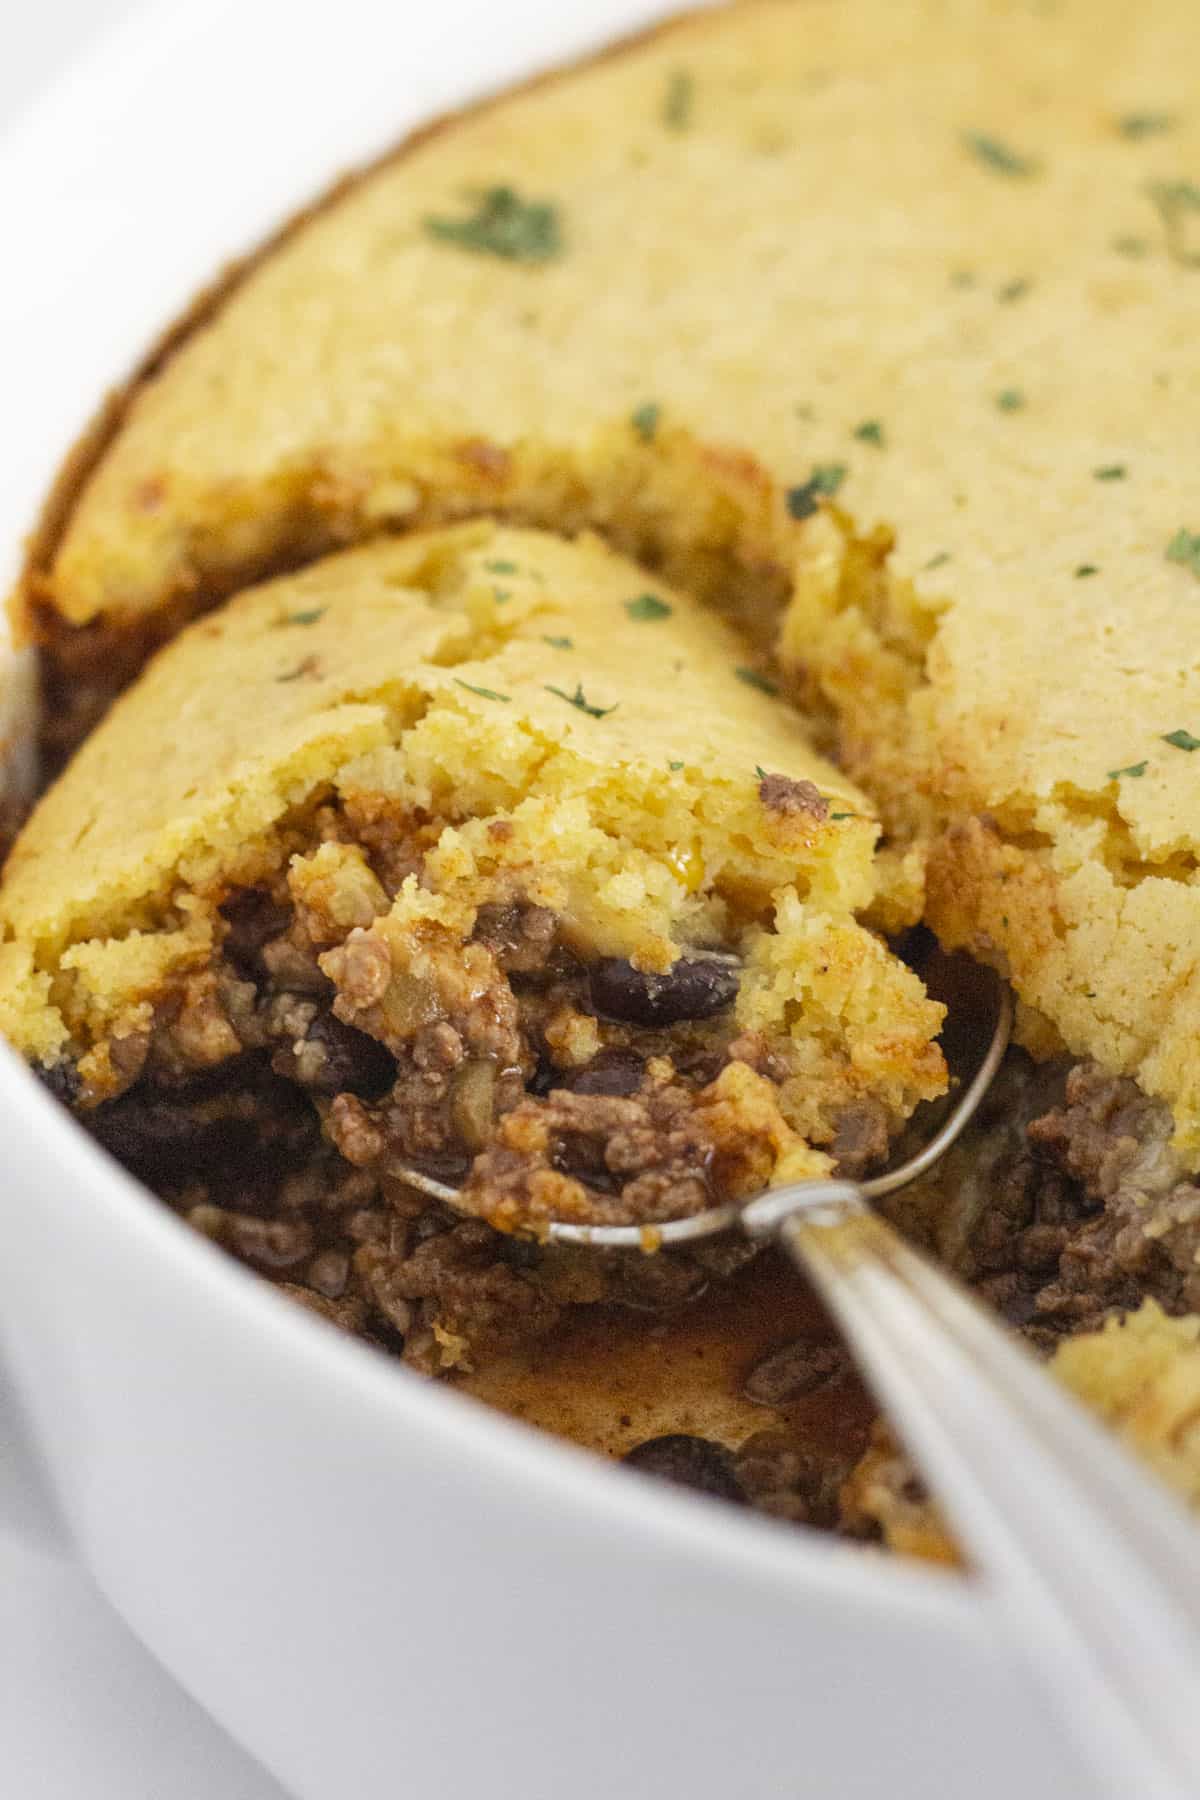 Scooping delicious Jiffy Tamale Pie with a spoon.